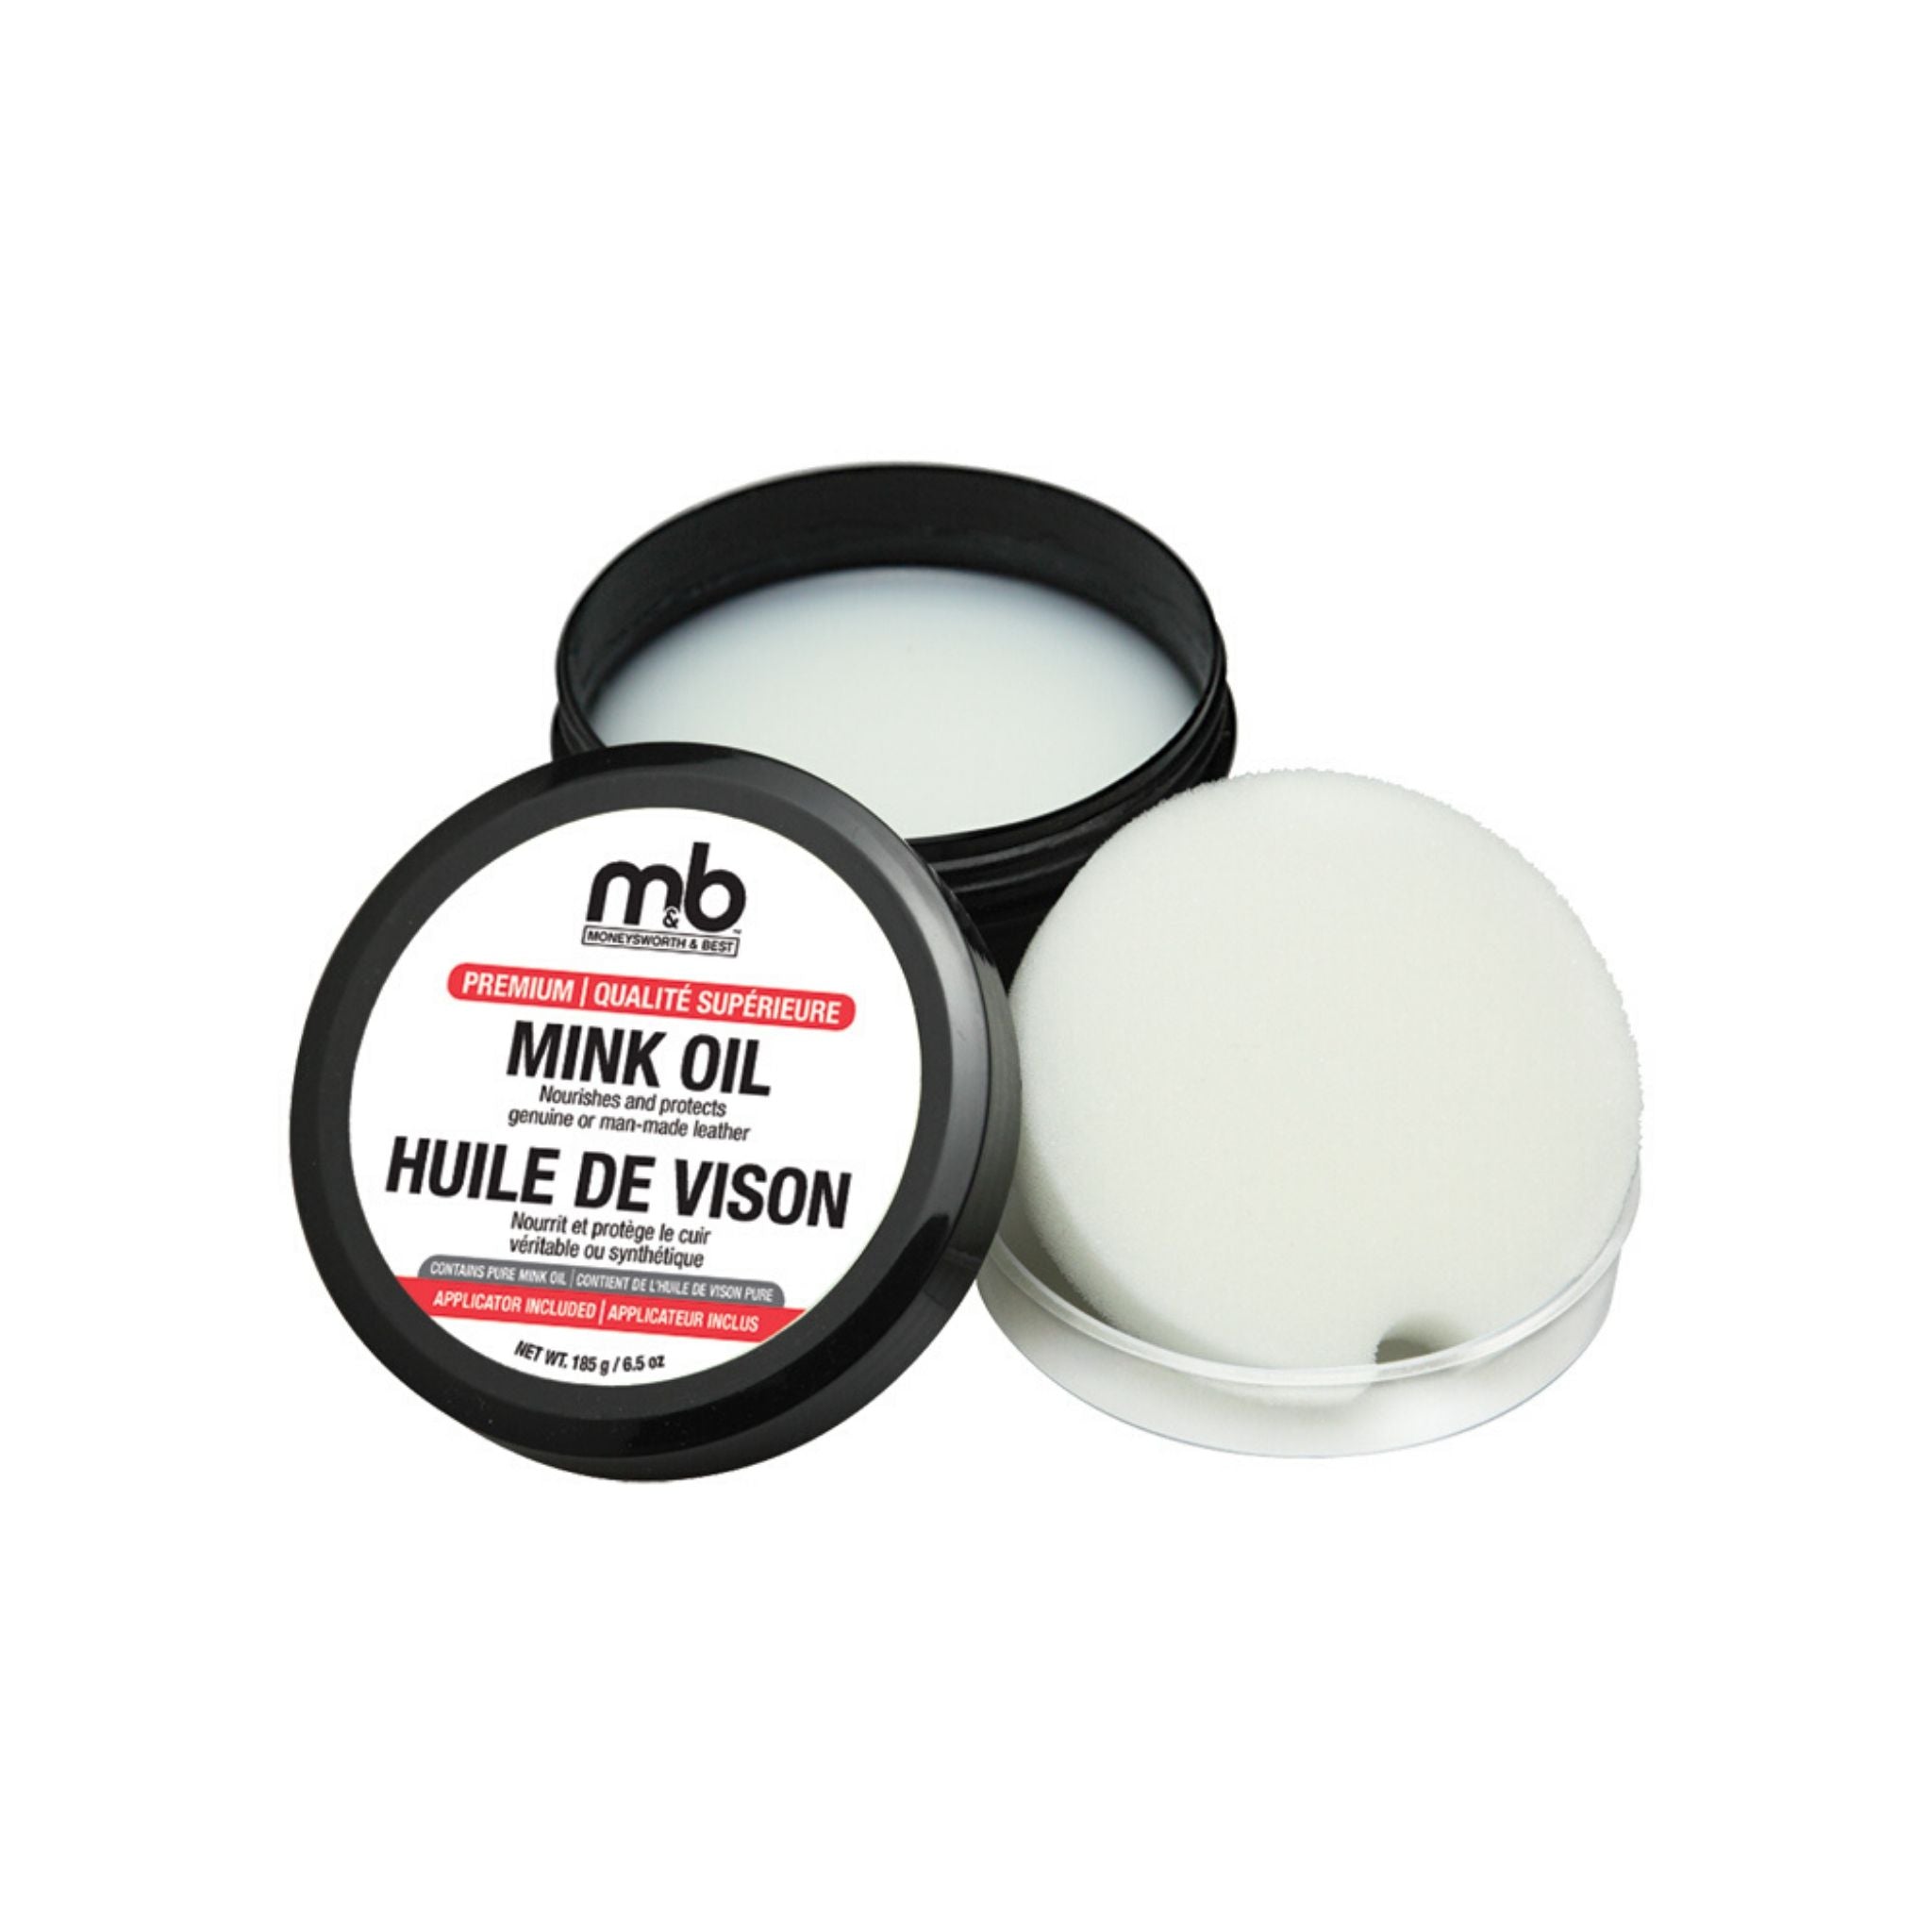 Open Mink oil with white contents and applicator round sponge